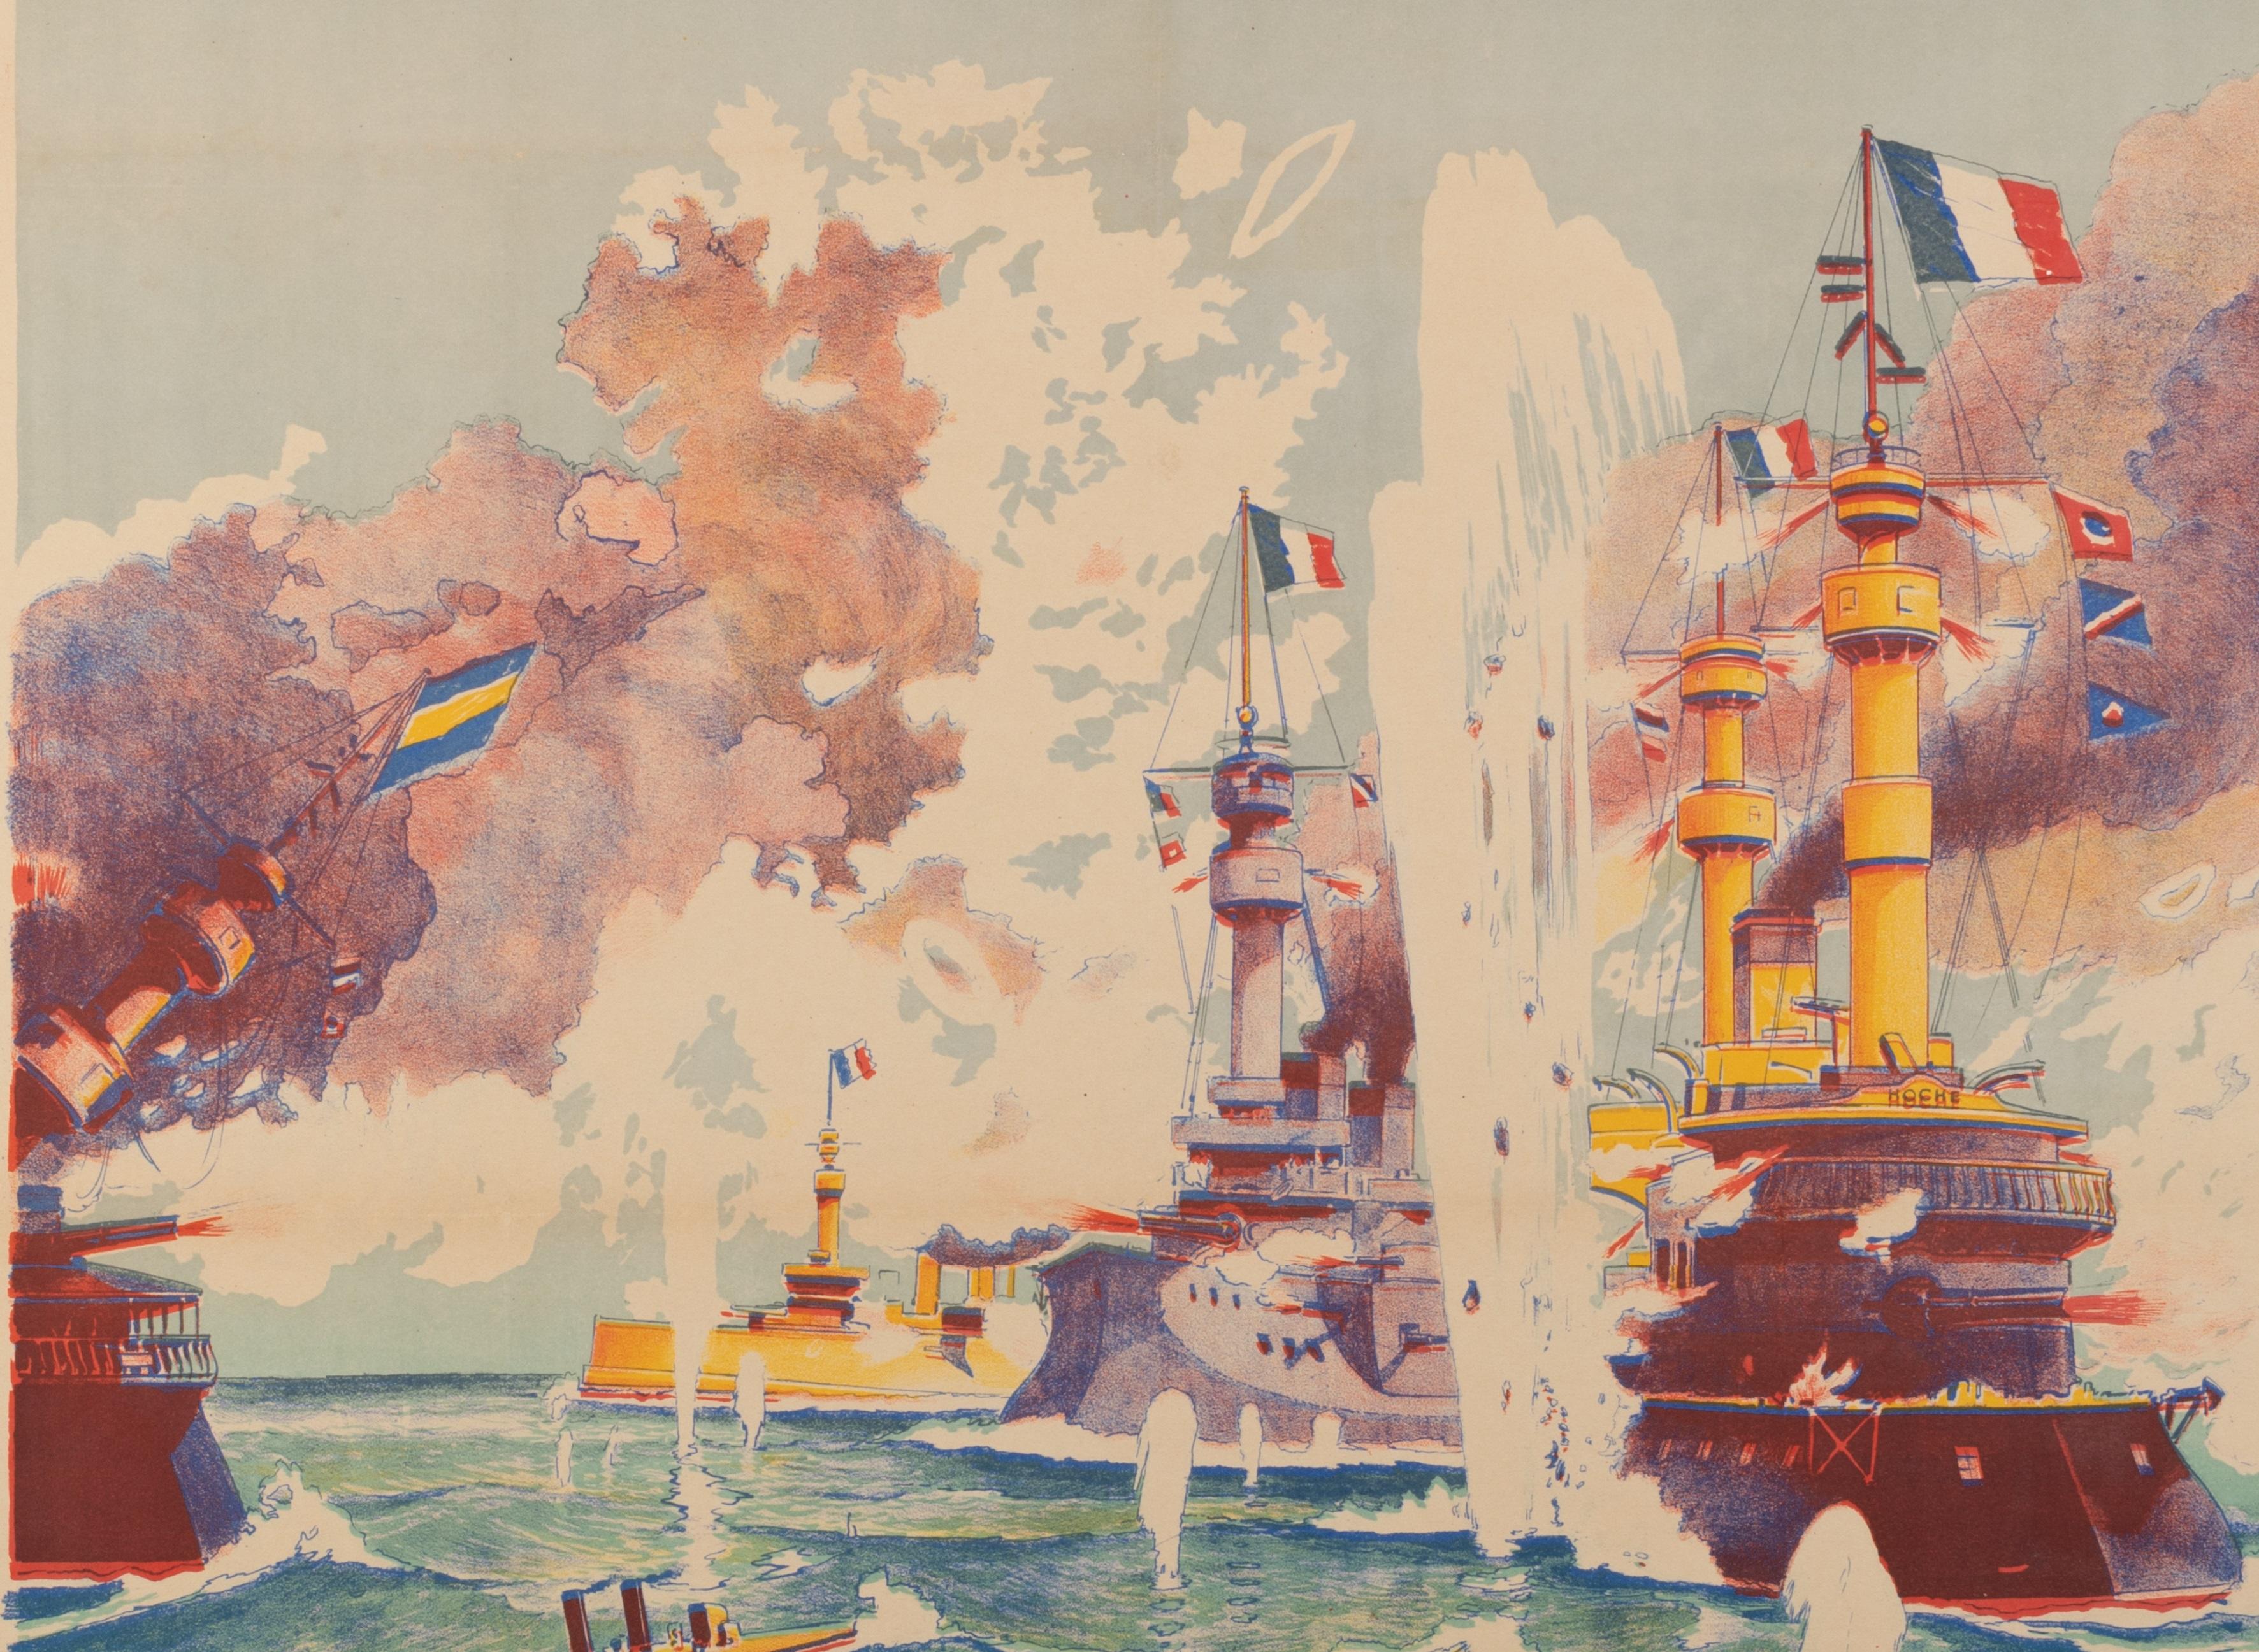 Poster produced for the Universal Exhibition of 1900 in Paris to promote an attraction on the sidelines of the Exhibition, namely a naval battle.
Indeed, between Porte Maillot and Porte des Ternes you could see warships and submarines fighting on a